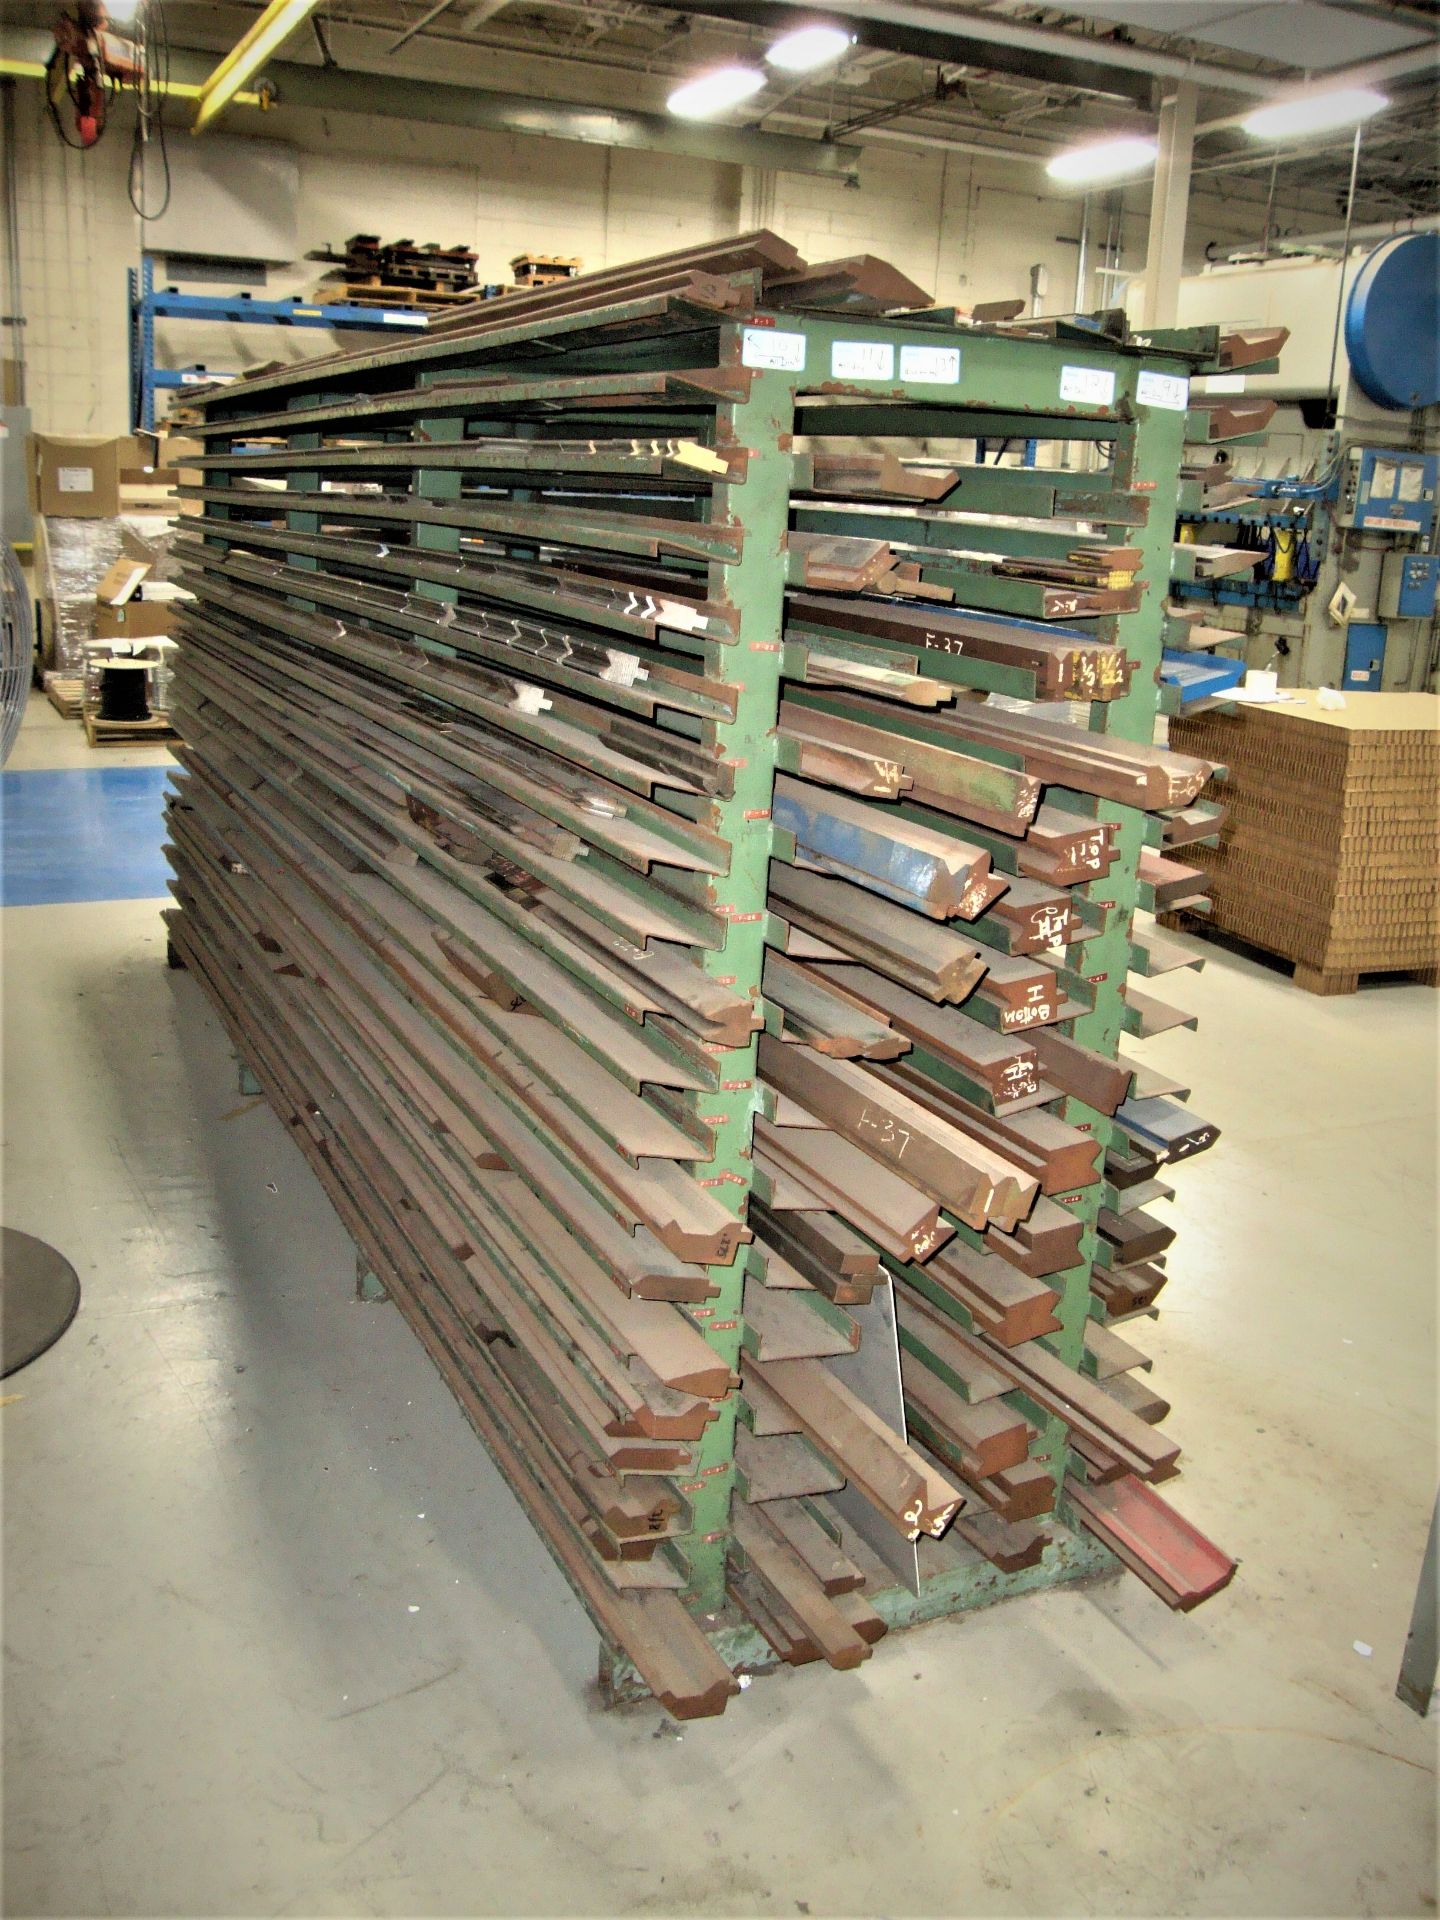 Die Rack ONLY, approx. 144" x 36' x 70" tall, Note-Cannot be removed until Rigging Day - Image 2 of 2